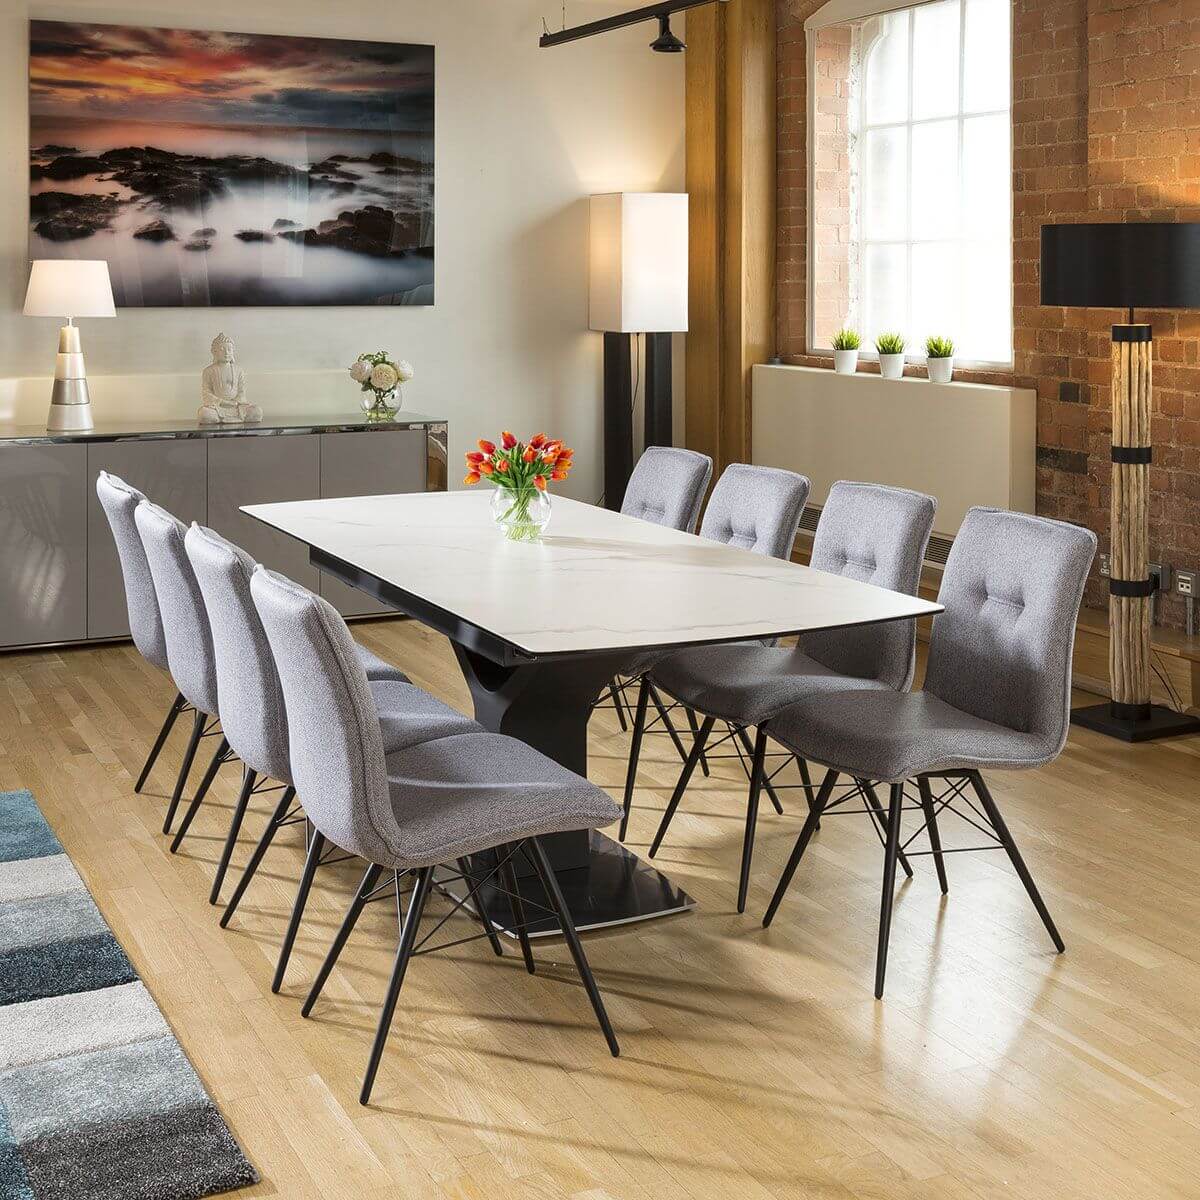 Stunning Marble Dining Table of 8 Seats